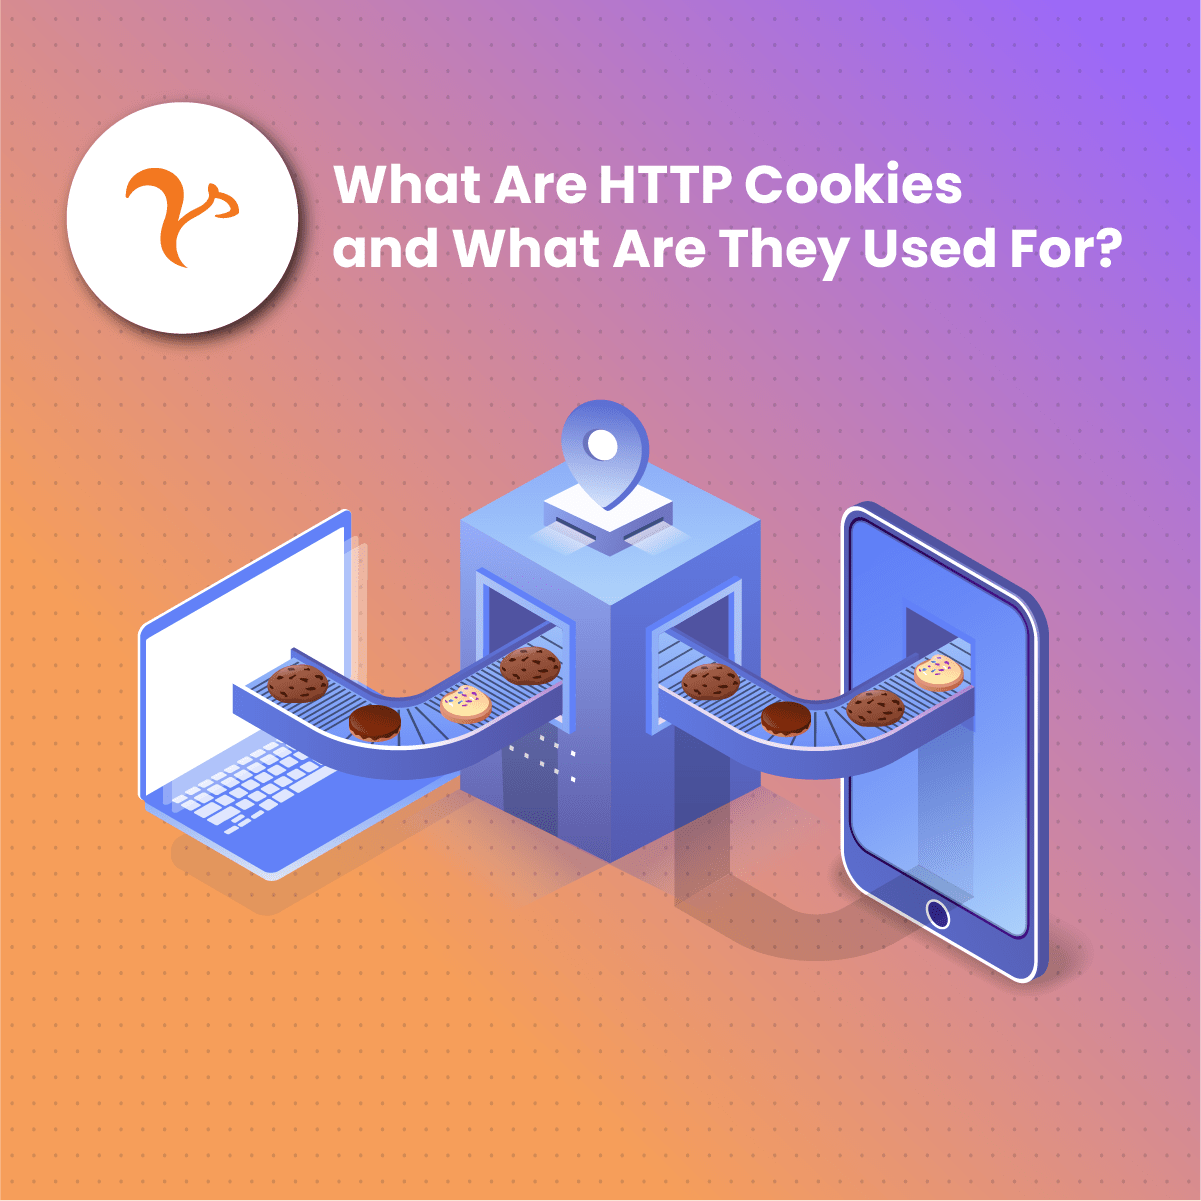 What Are HTTP Cookies and What Are They Used For